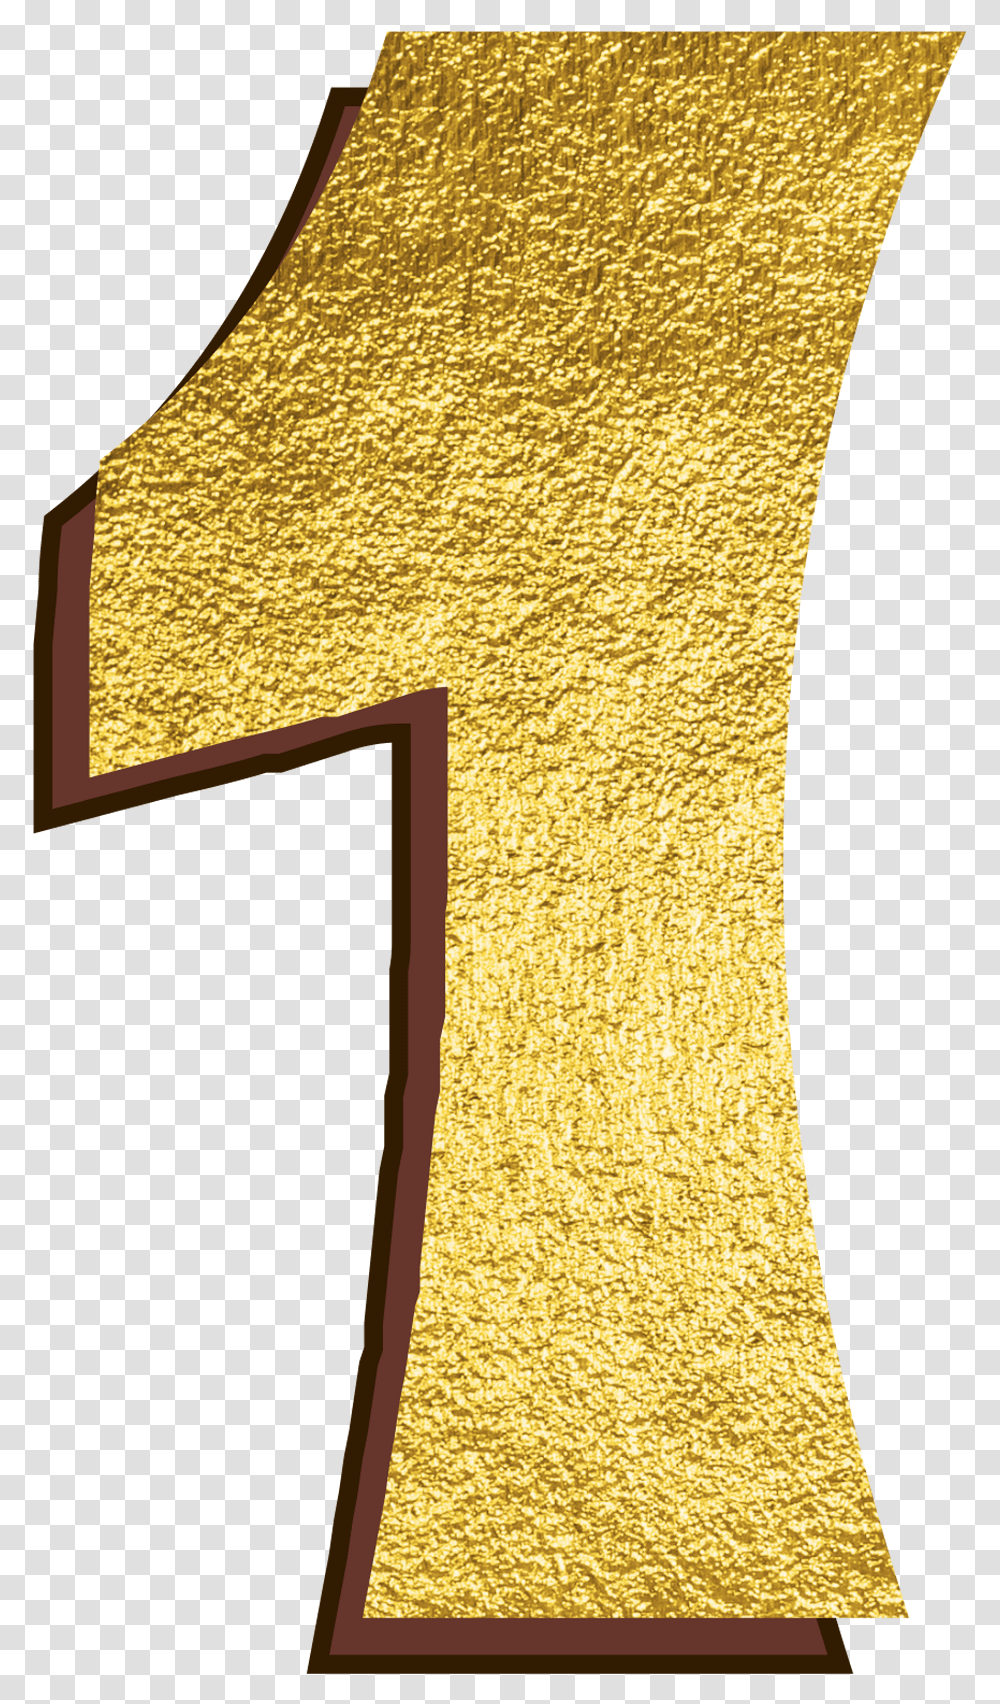 Plug The Golden Ticket Usb Drive Into Your Computer Wood, Rug, Cross Transparent Png